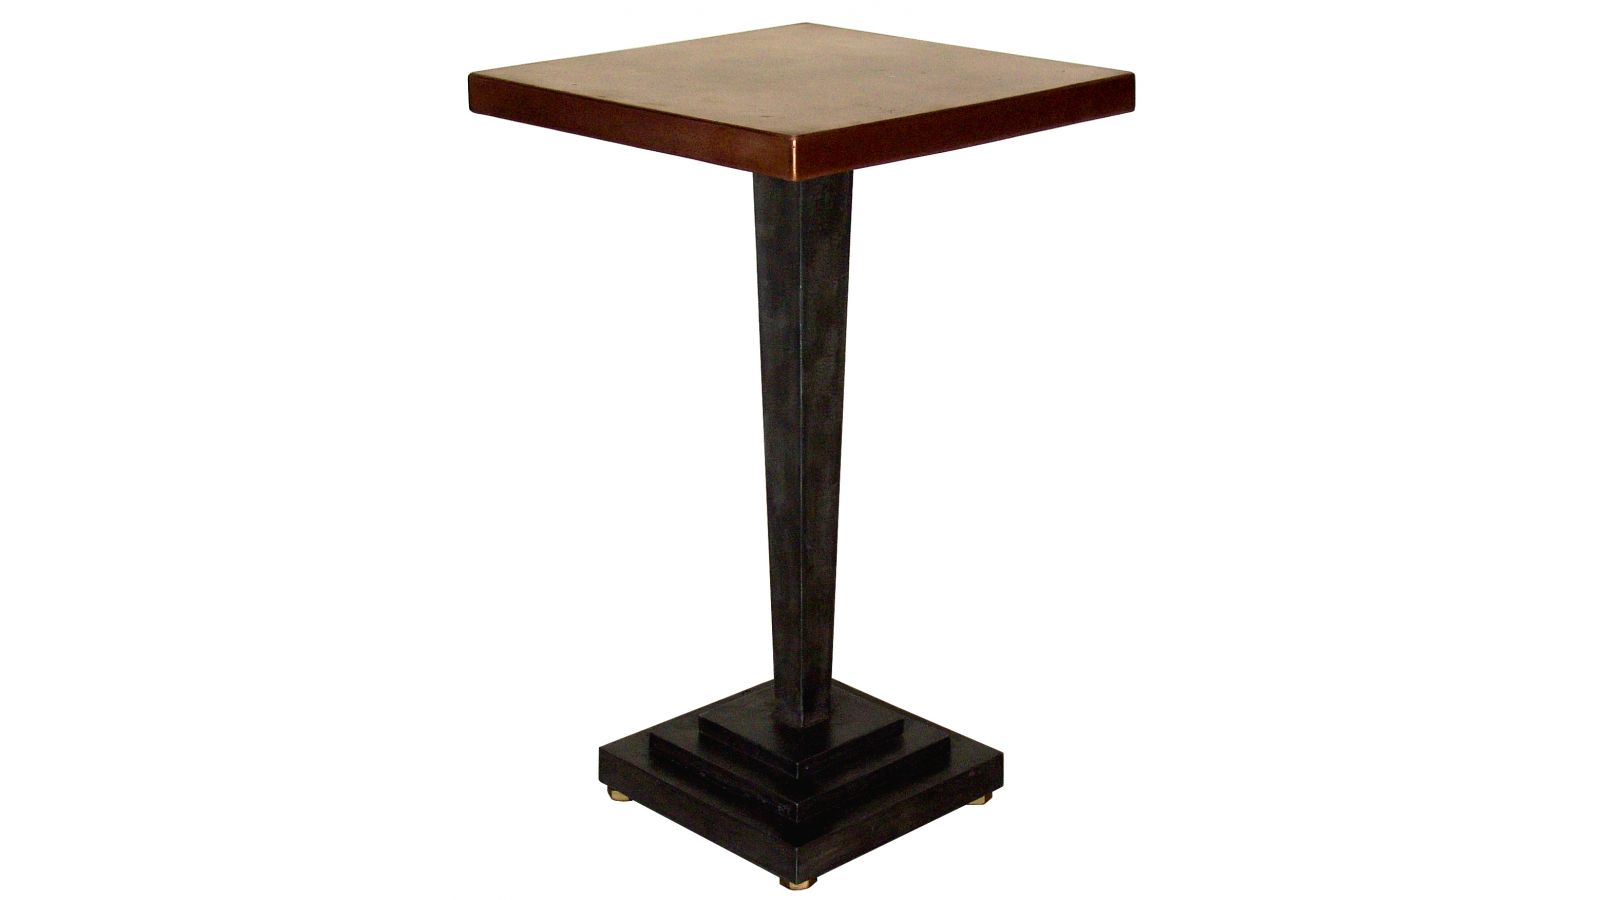 DT79001 Brasserie Table with Copper Top (Small)